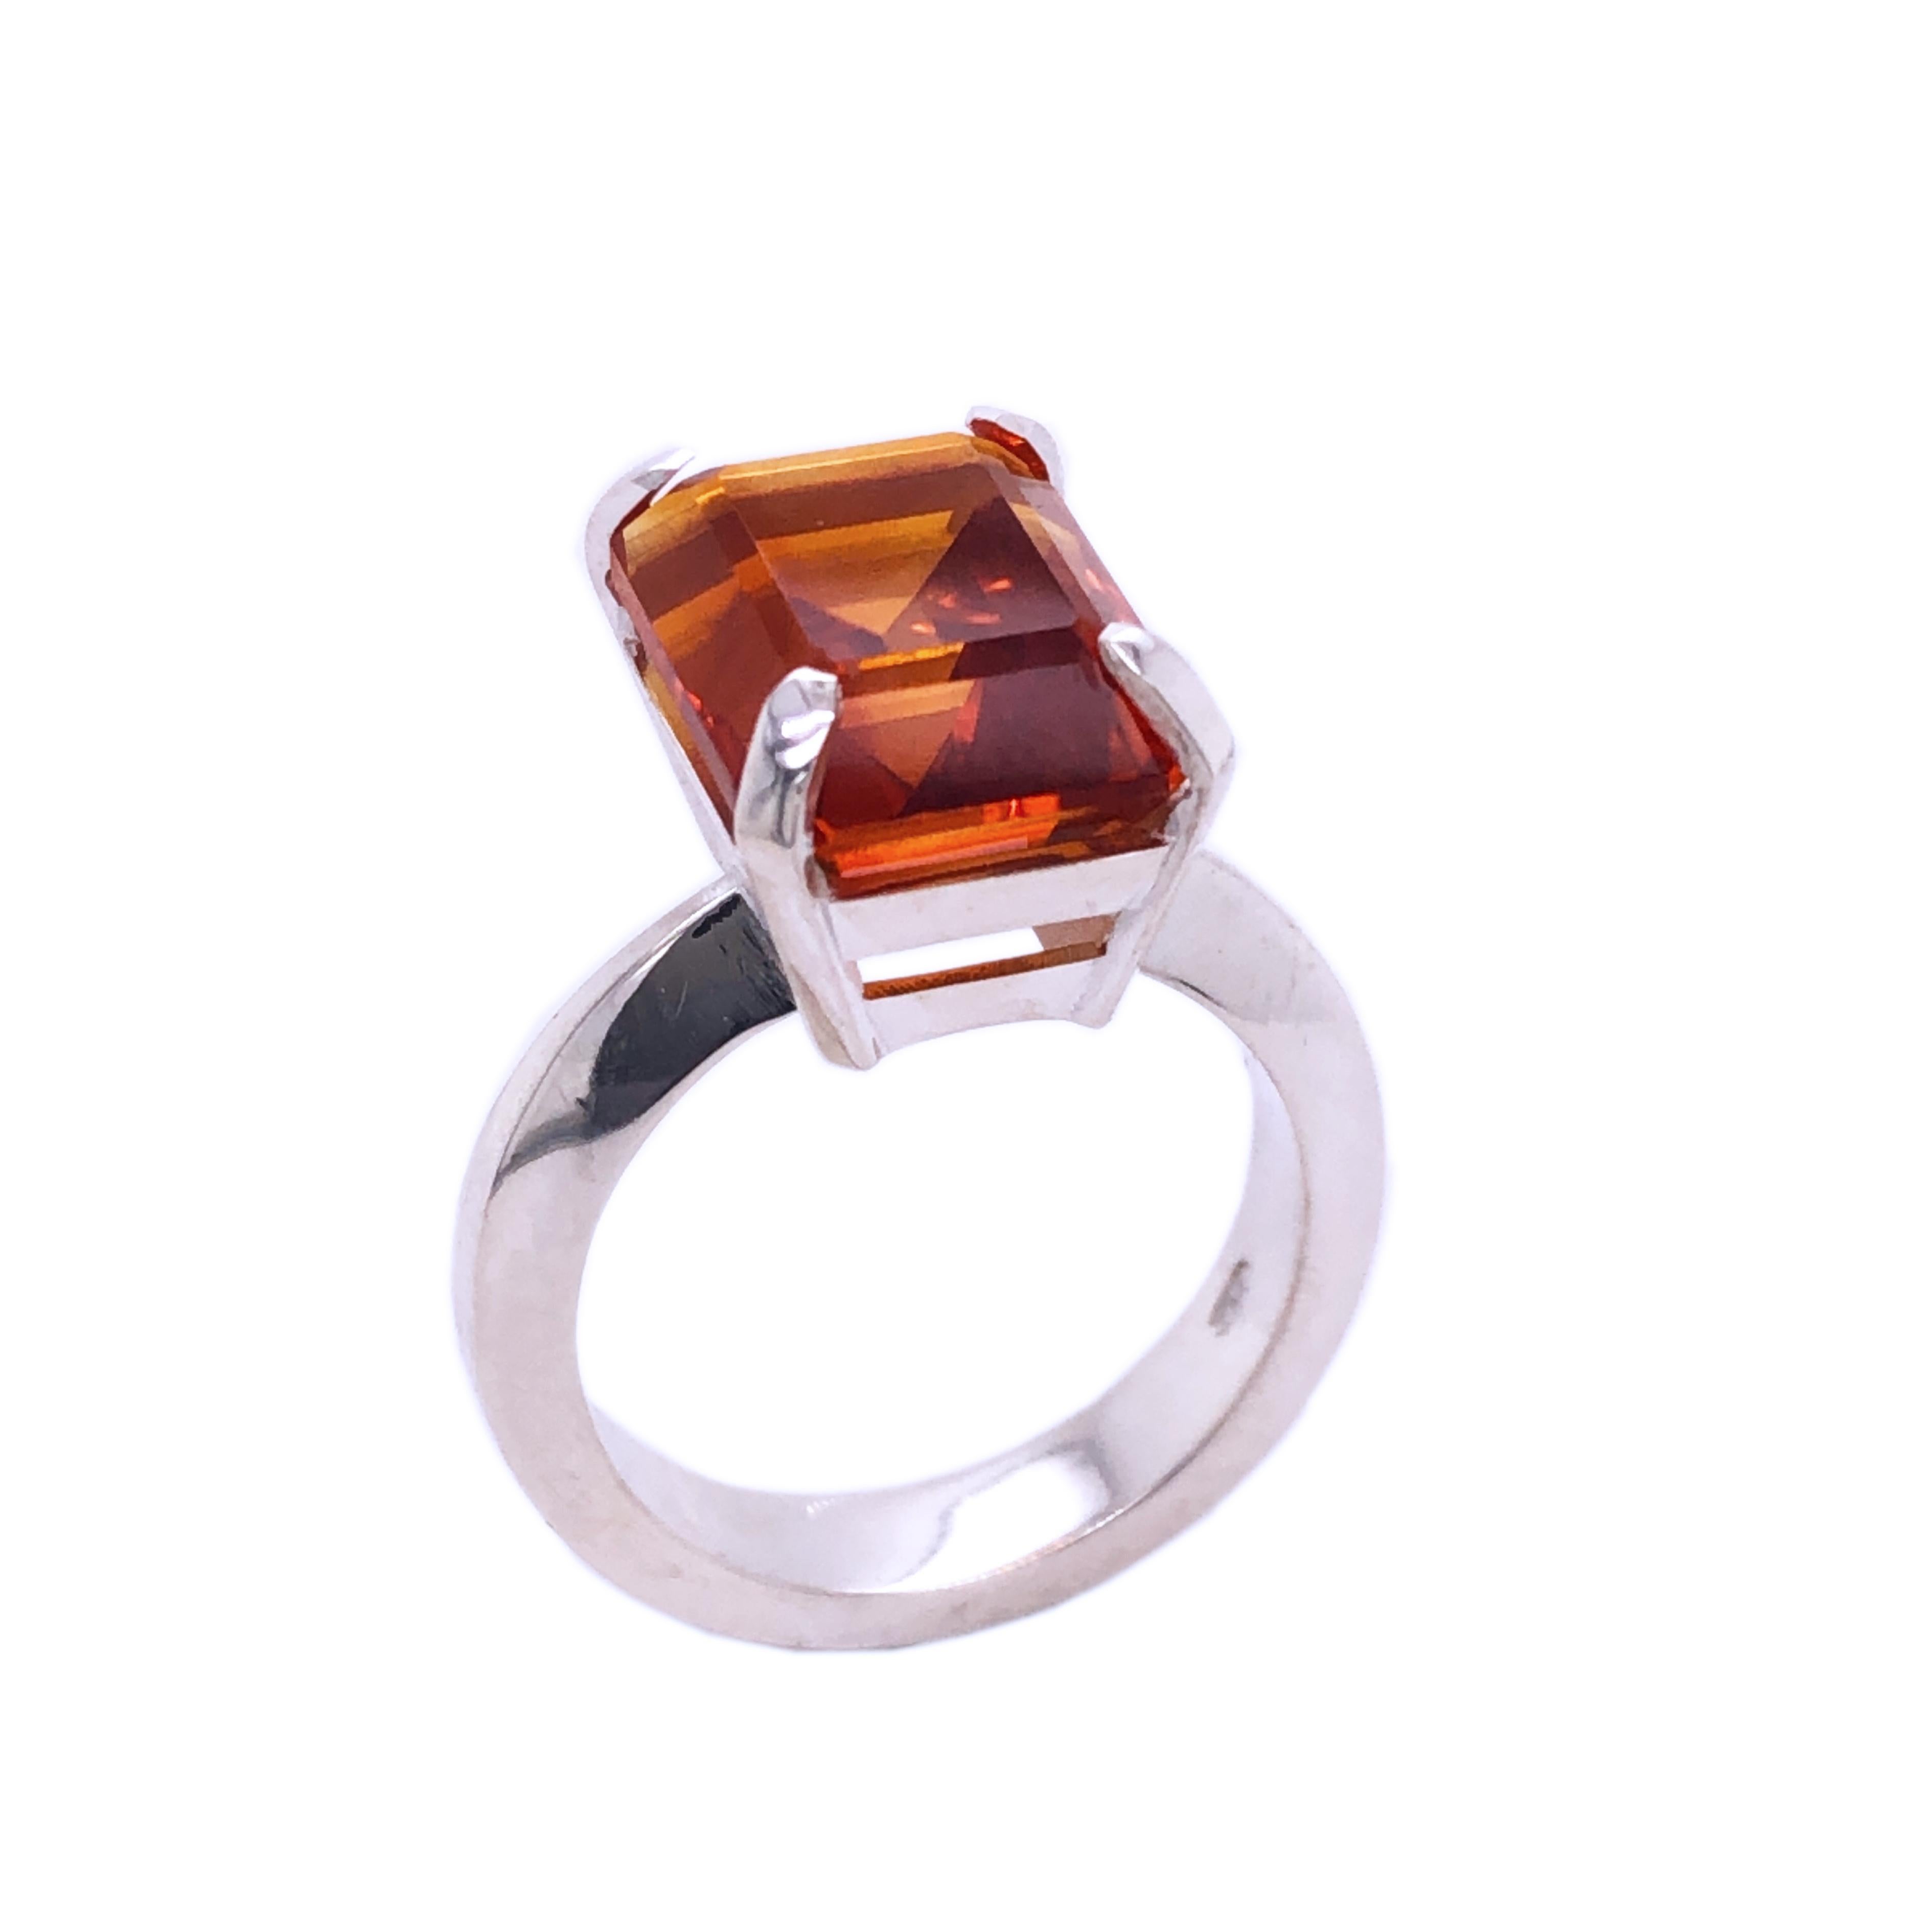 One-of-a-kind 7.60 Carat Emerald Cut Natural Madeira Citrine(0.531inches lenght 0.424inches width, 12.30x10.0mm) in a Chic yet Timeless Mirror Finish Sterling Silver Cocktail Setting.
We are proud to offer this awesome piece perfect as Engagement